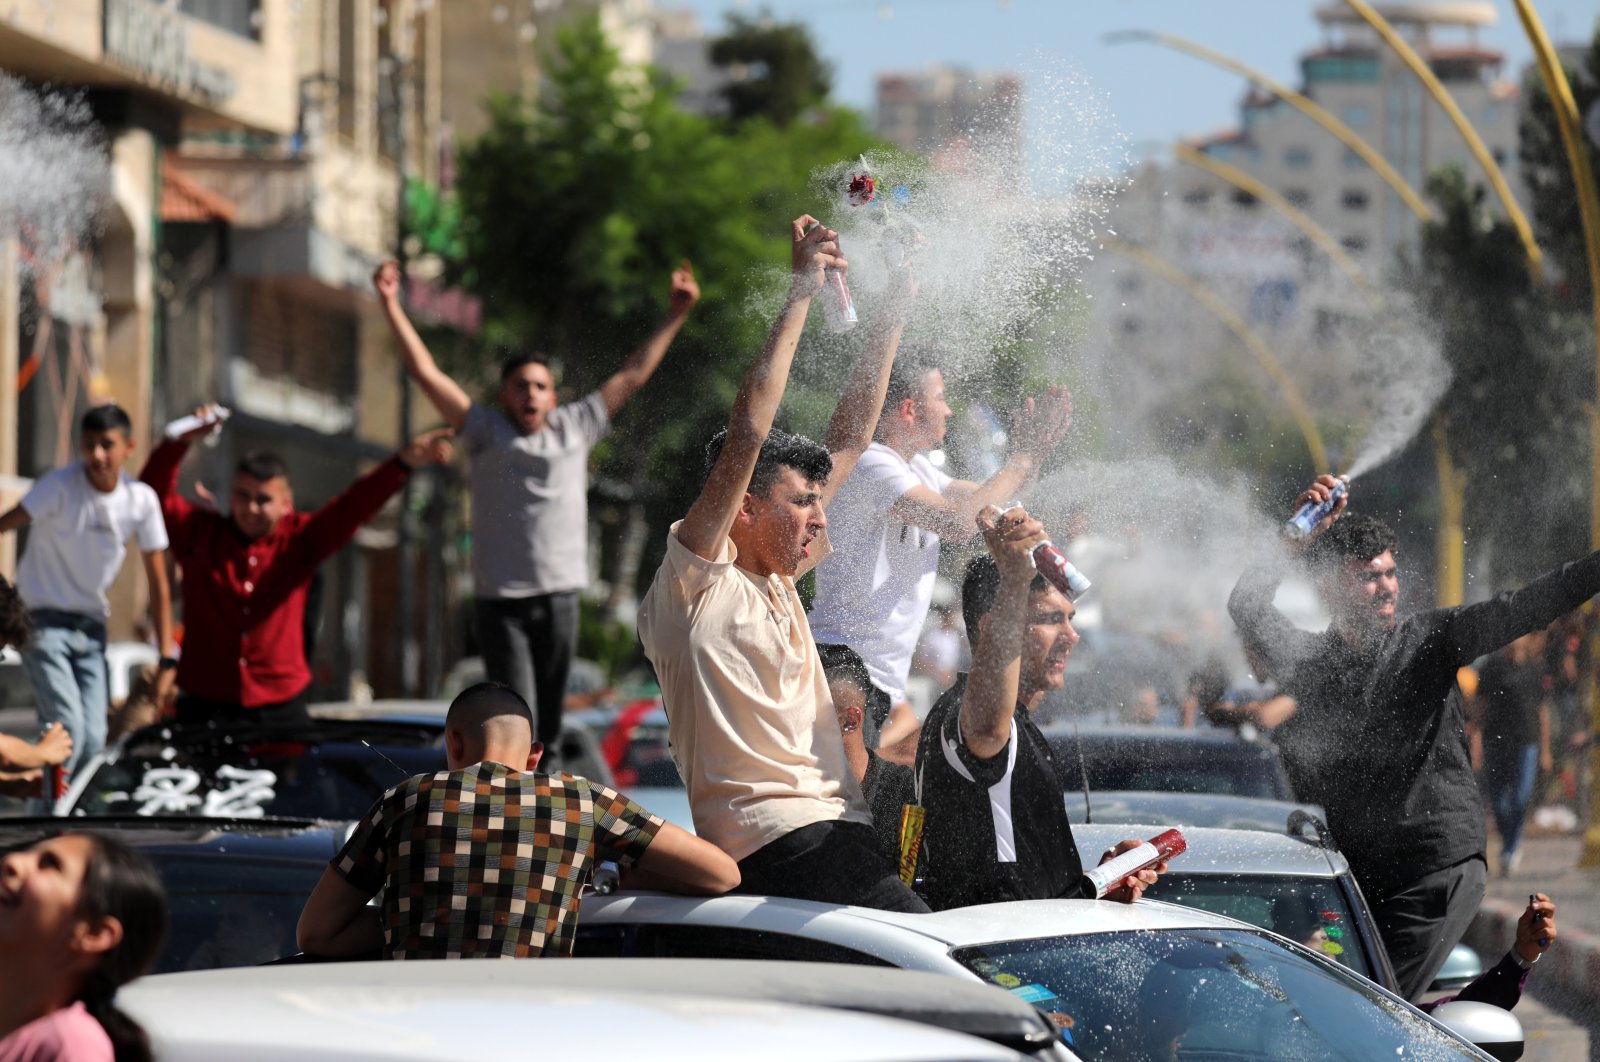 Palestinian high school students celebrate after receiving their exam results in a convoy of cars on the streets of Hebron, West Bank, Palestine, July 30, 2022. (EPA Photo)